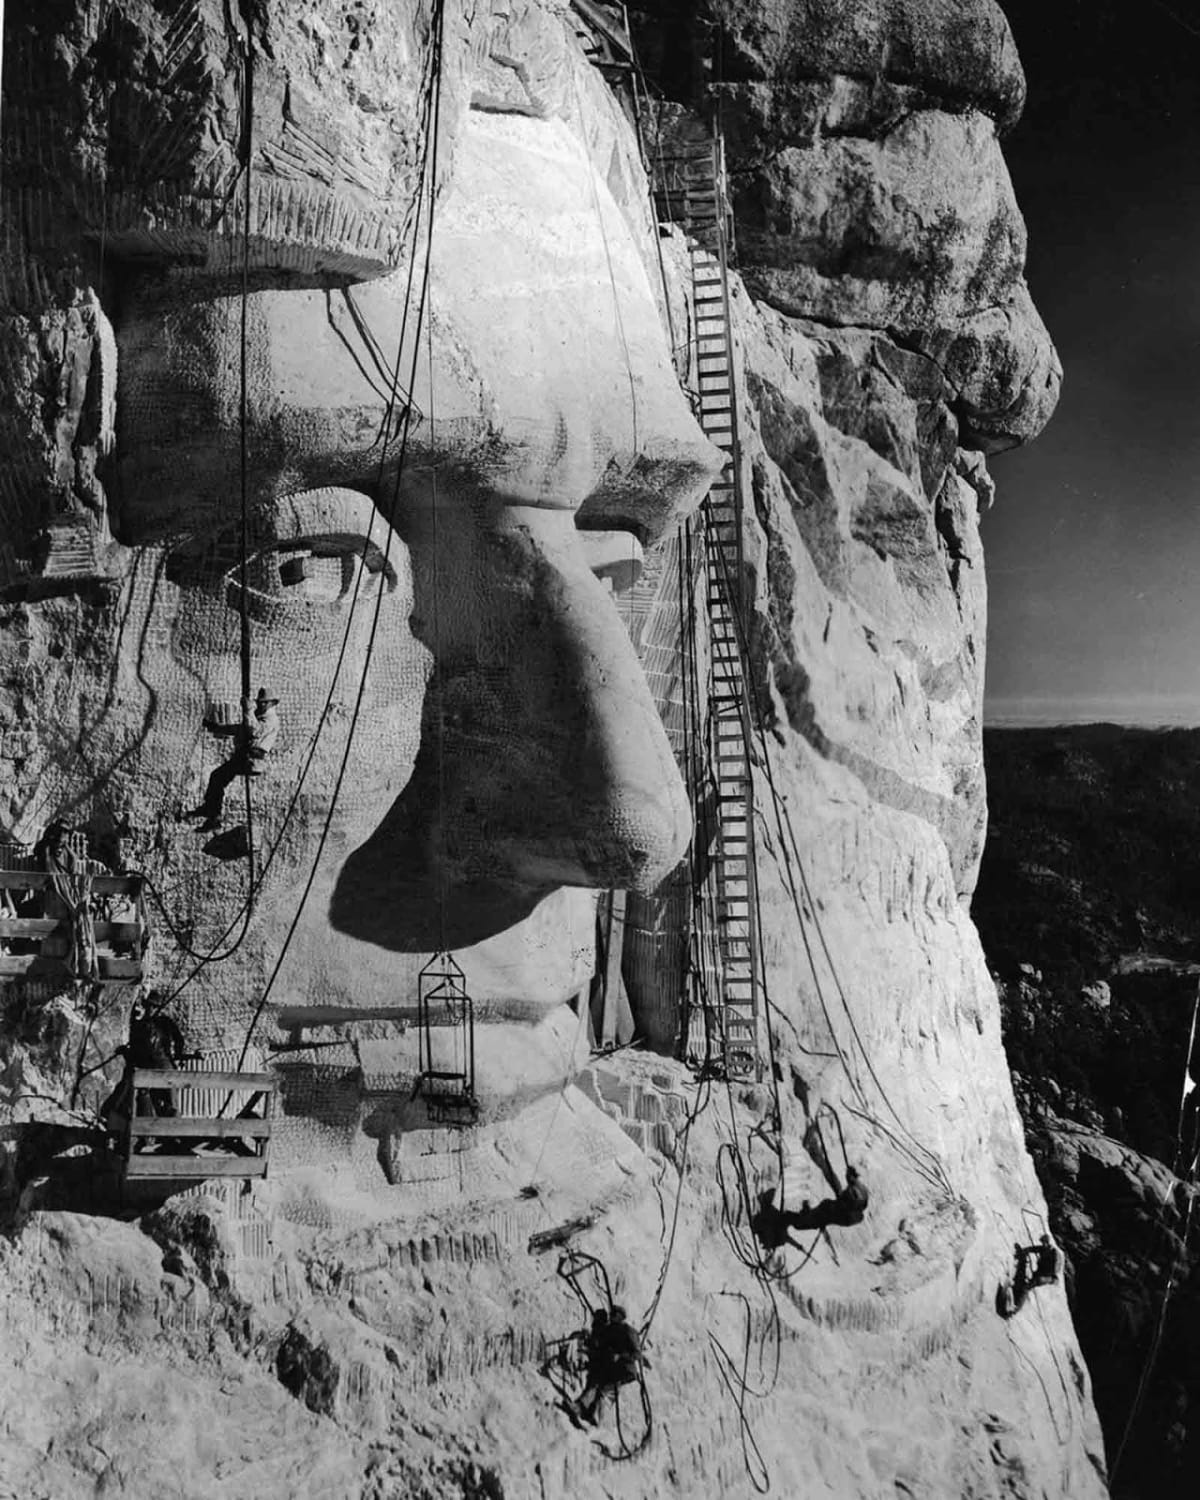 Project leader Gutzon Borglum hangs below an eye as his crew works on Abraham Lincoln’s head, Mt. Rushmore. 1935.